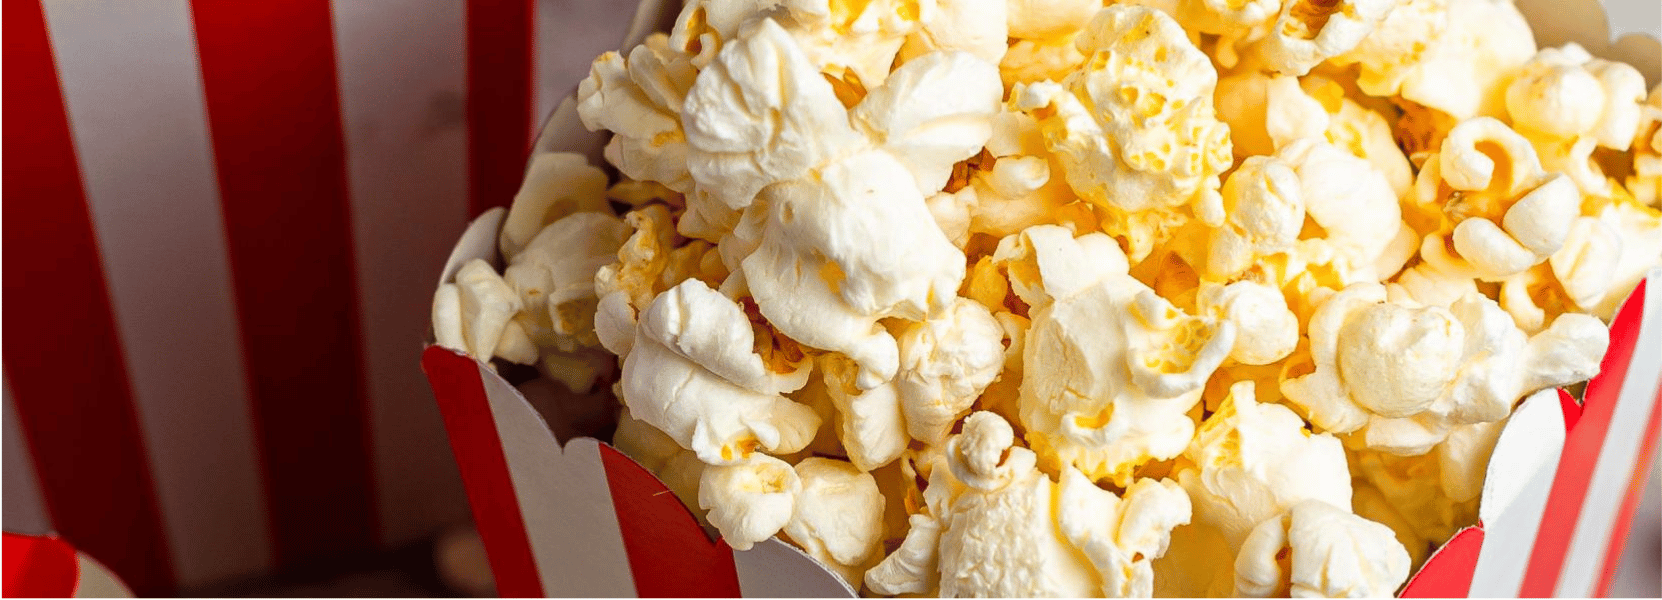 Close up of popcorn in a box